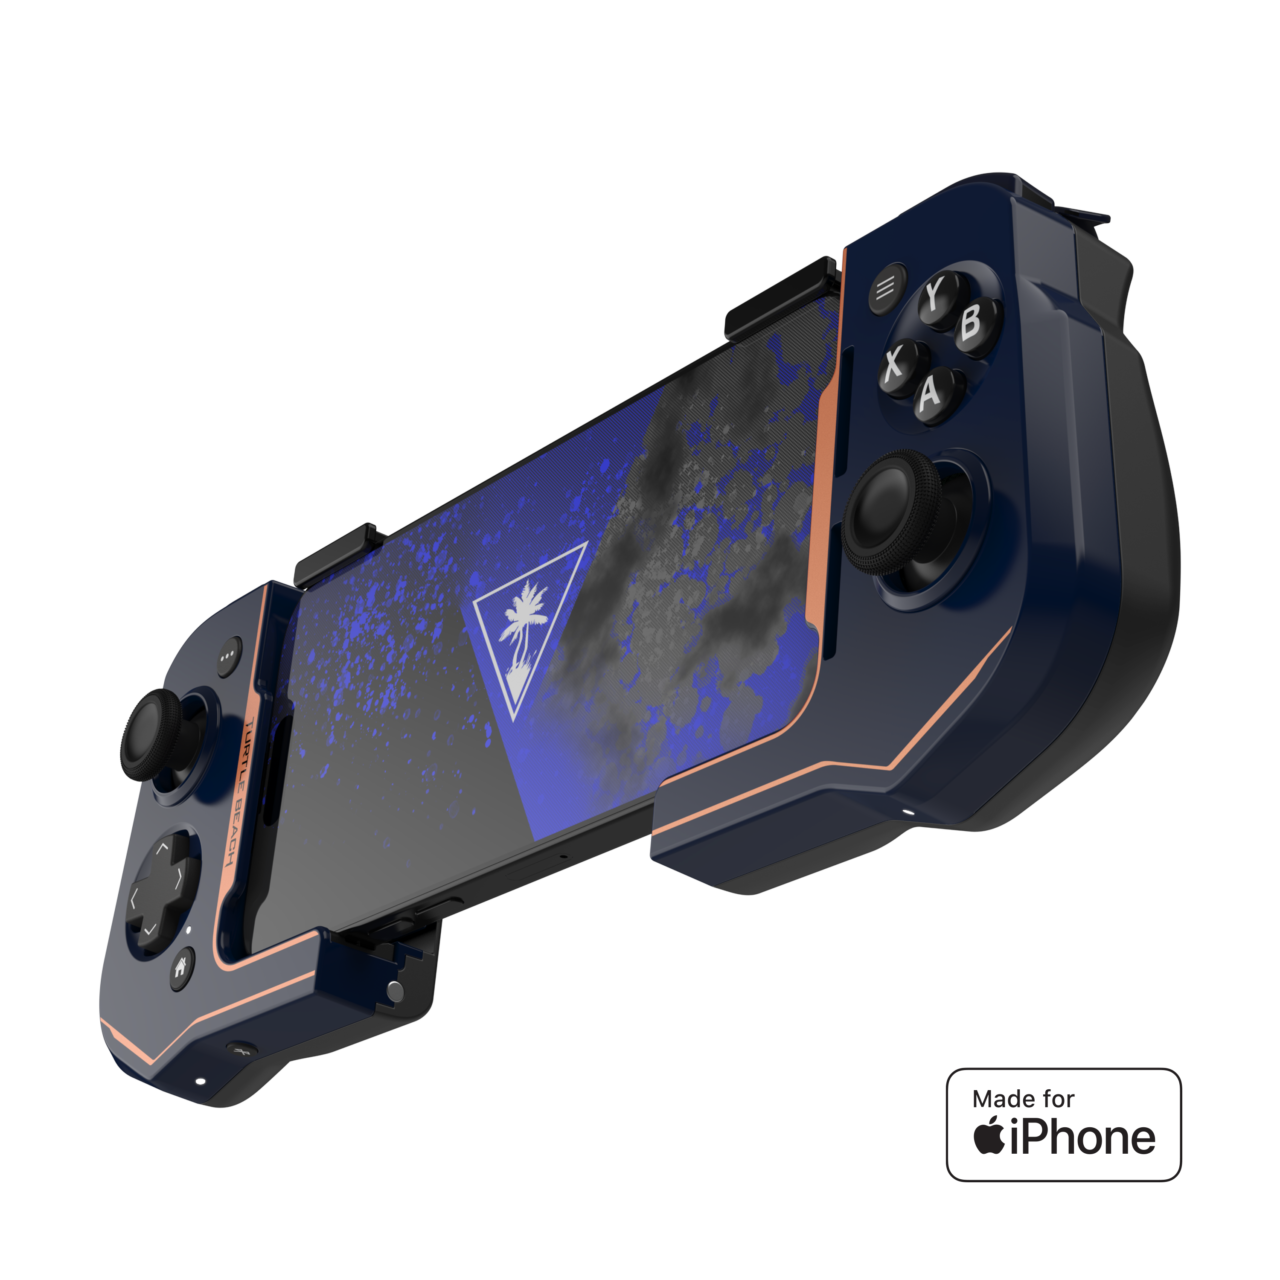 Atom Mobile Game Controller for iPhone image (Turtle Beach)